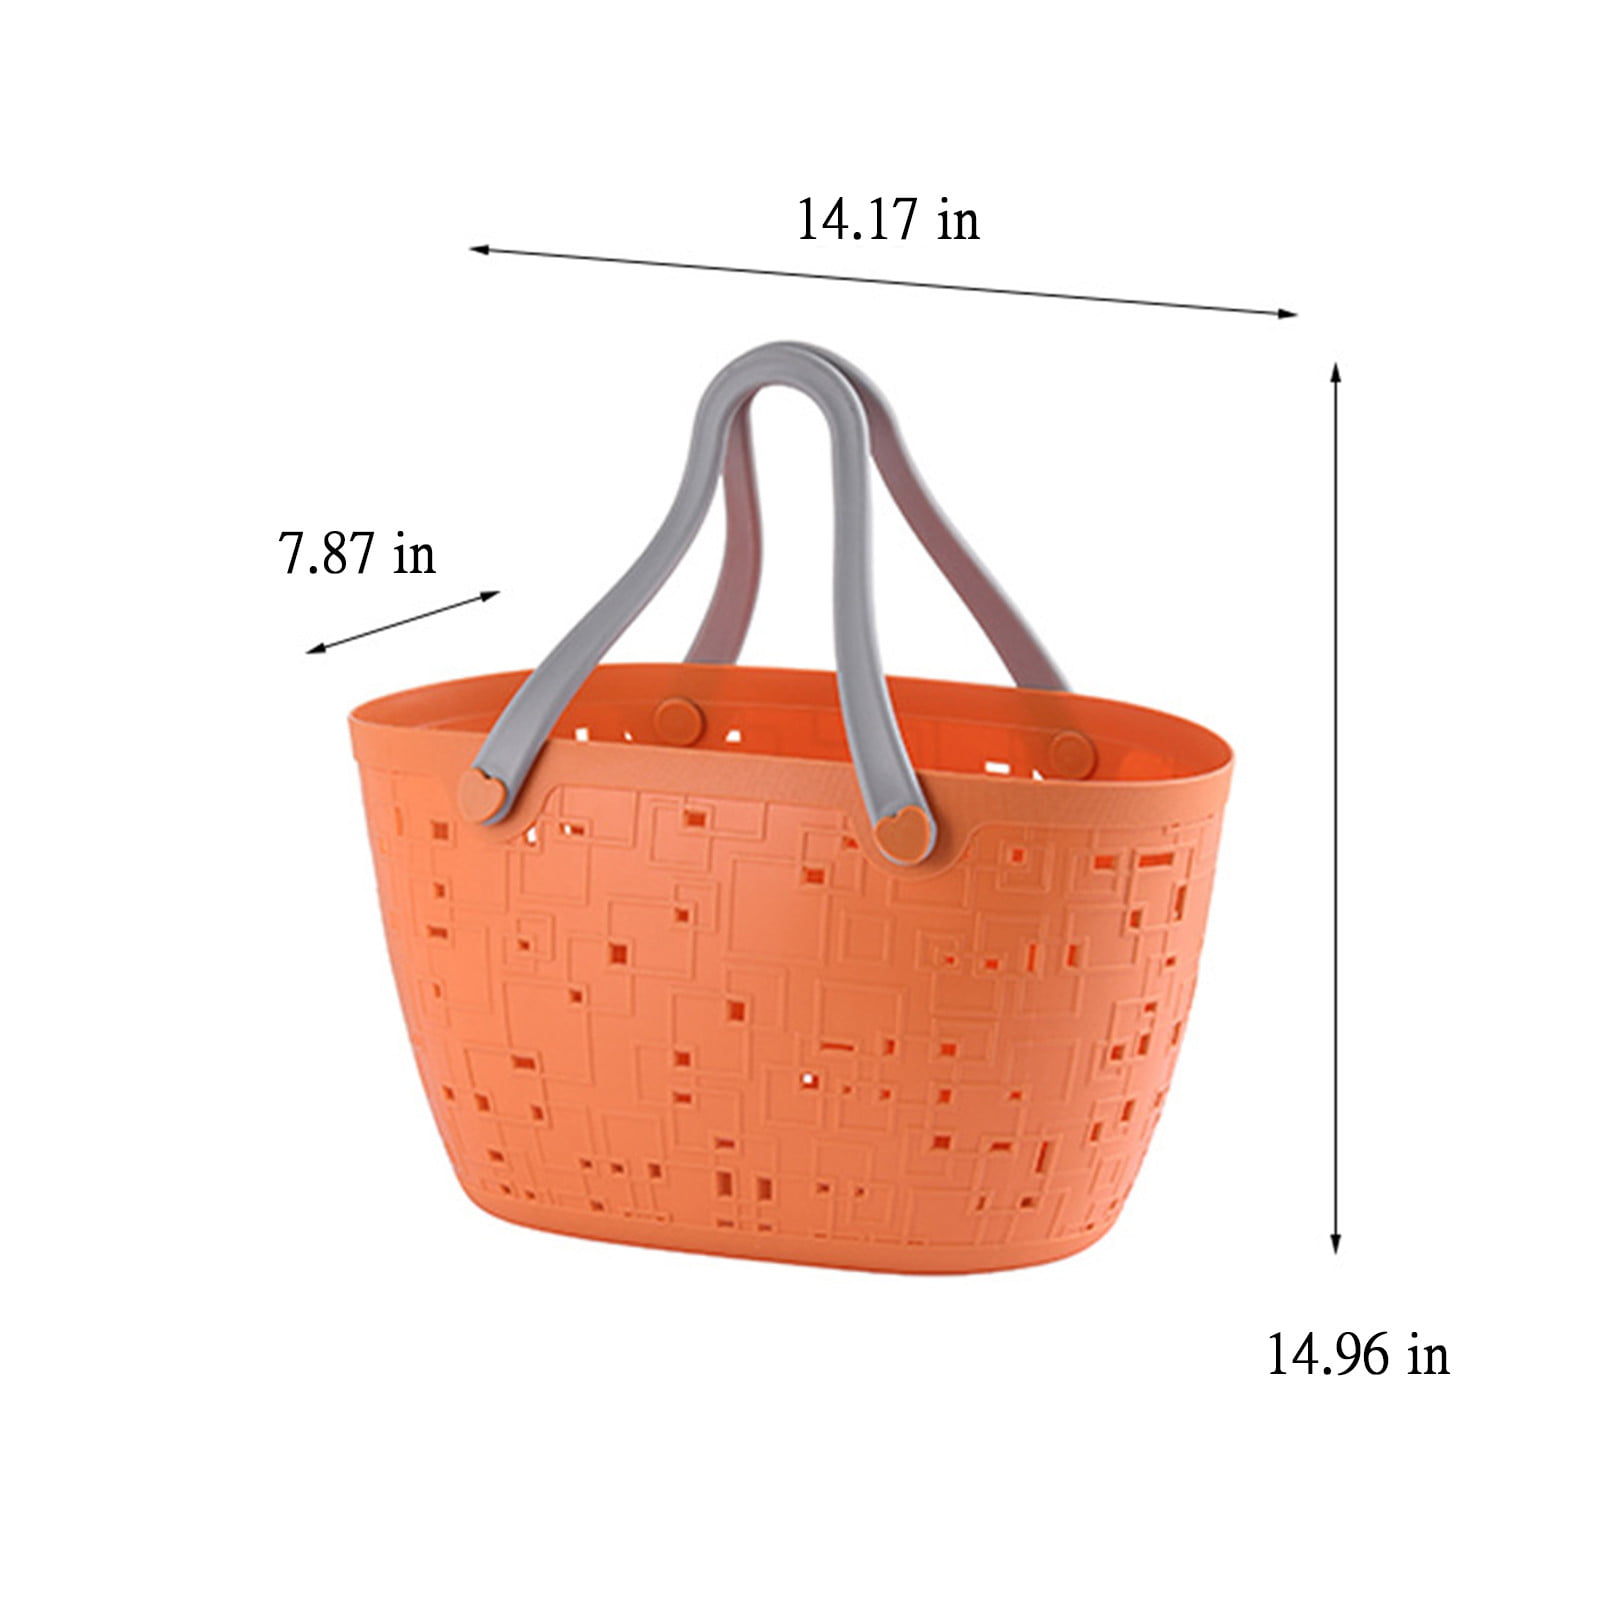 futaiphy Medium Beach Bag Rubber Tote Bag, Durable Open Tote Bag with Holes for Sports Beach Pool Sports